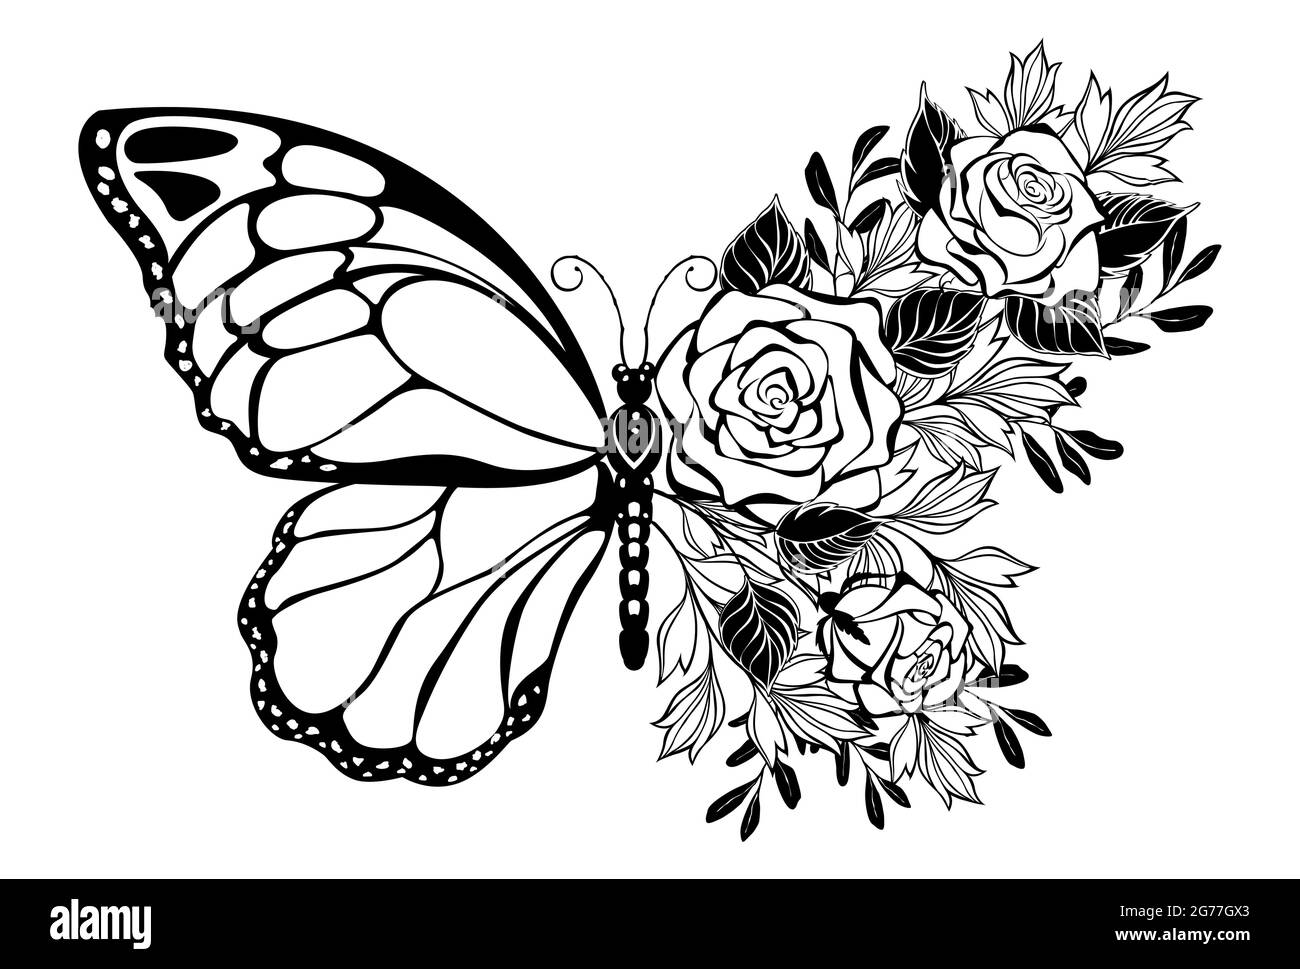 Composition of contour butterfly and bouquet of silhouette roses and ornamental plants on white background. Stock Vector